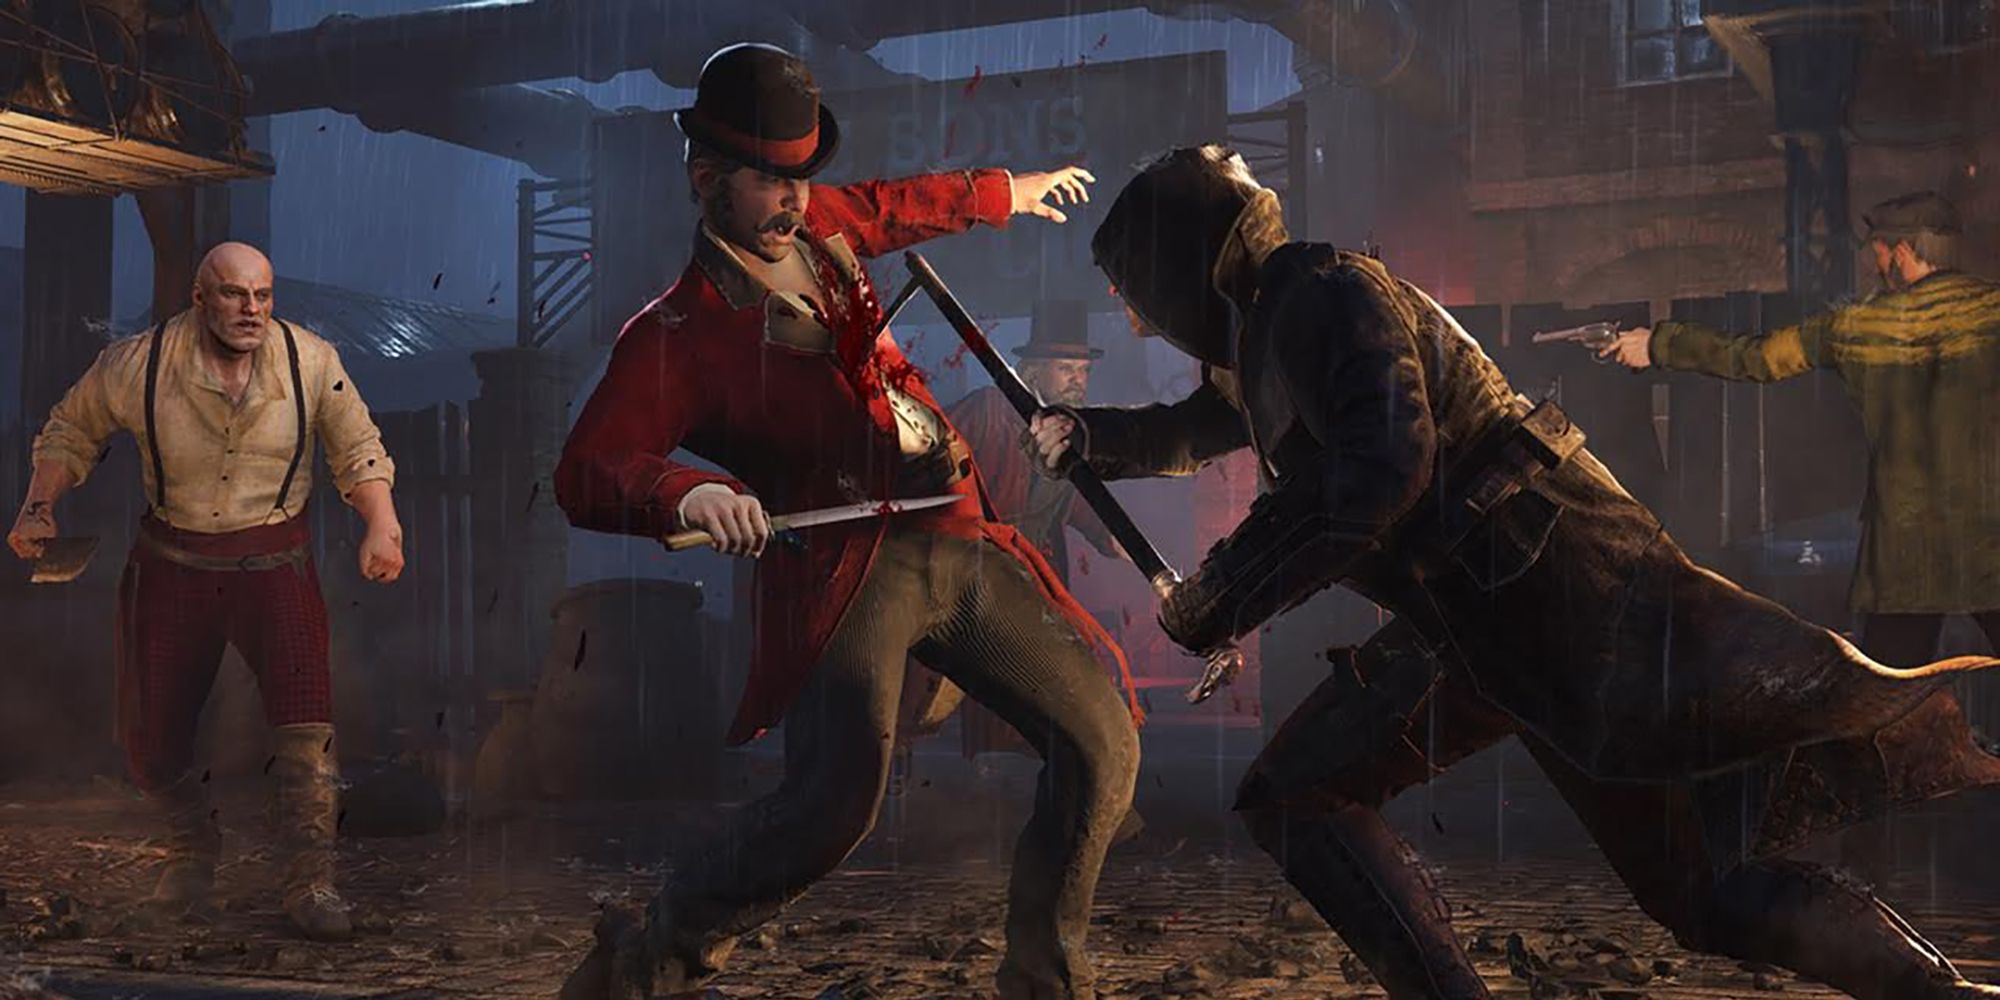 An Image From Assassin's Creed: Syndicate showing characters brawling